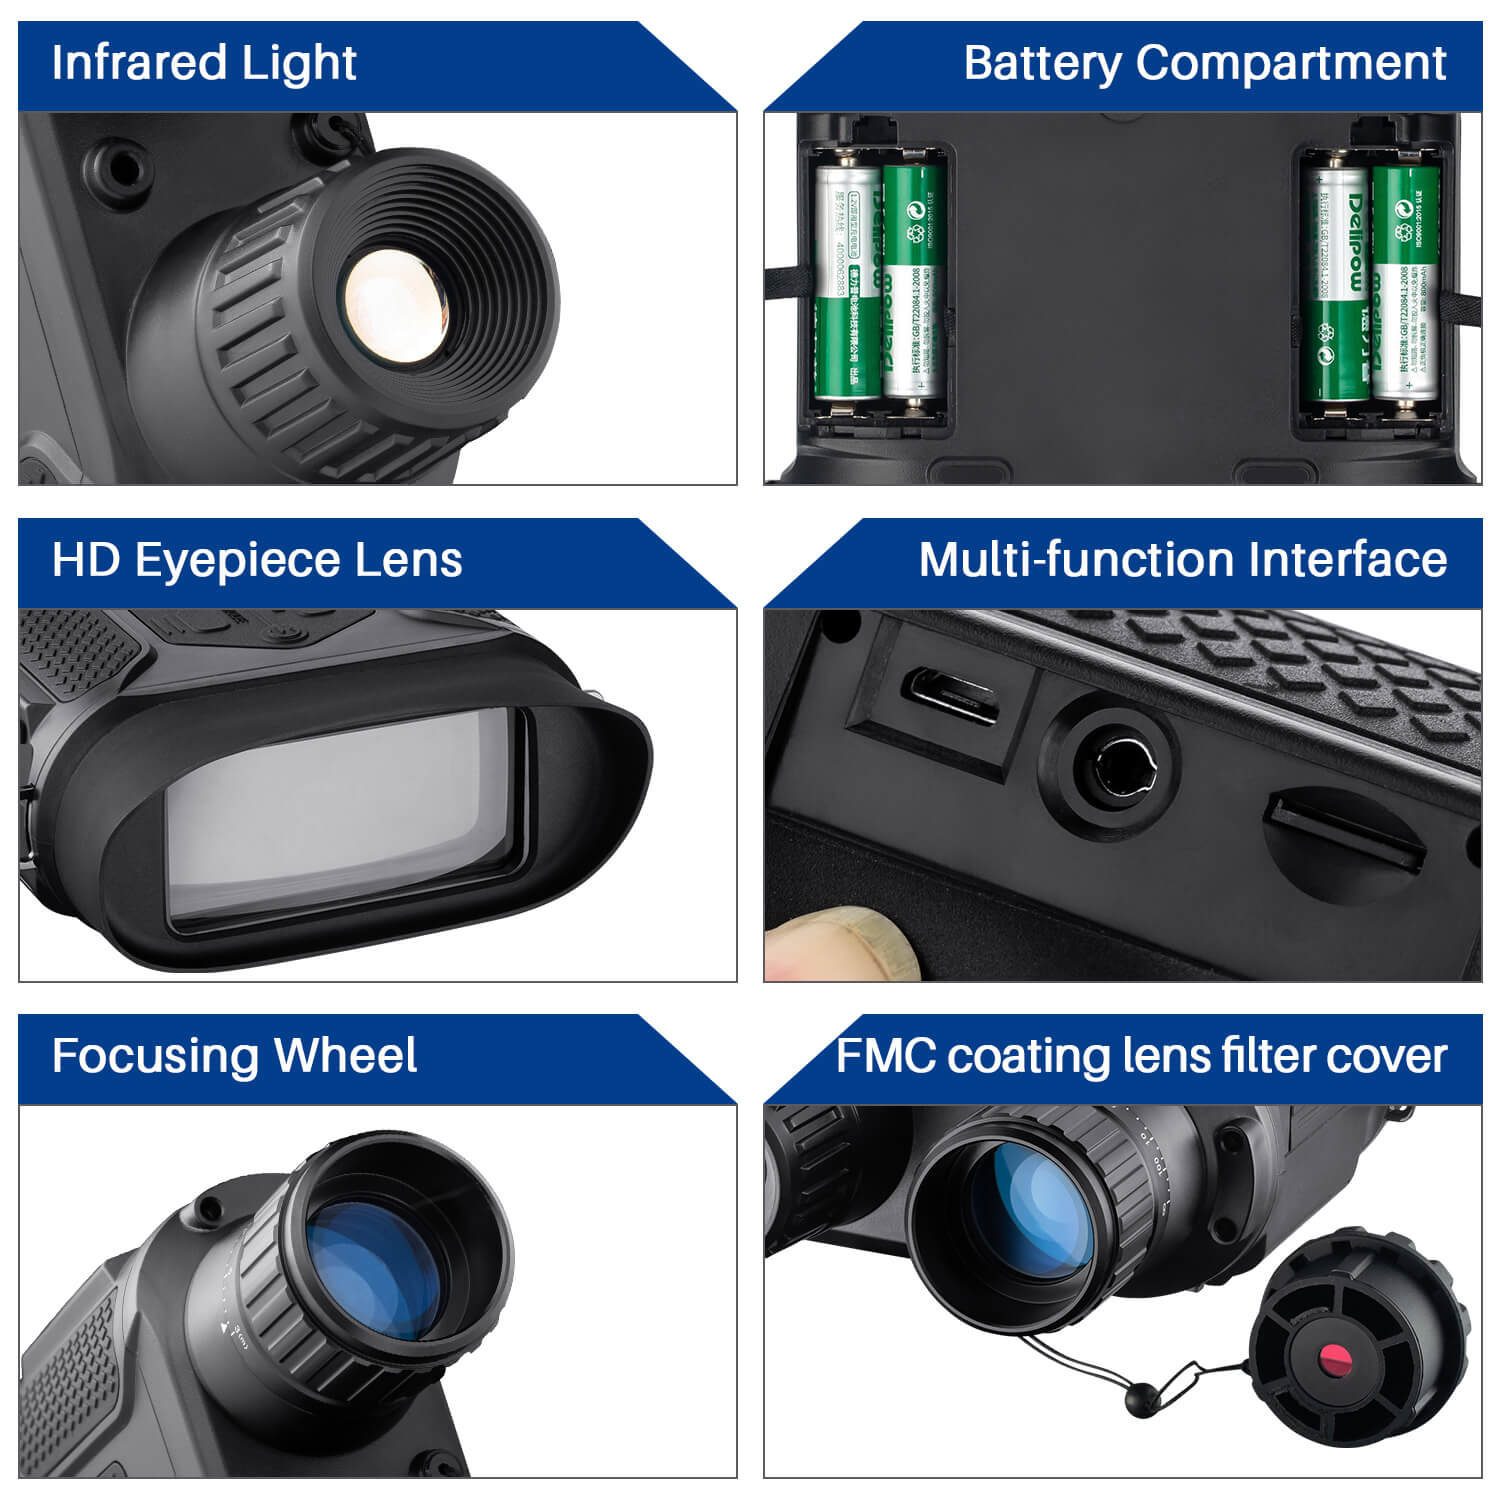 uscamel lk-22, other high light point, infrared light, battery compartment, hd eyepiece, fmc coating len with filter cover